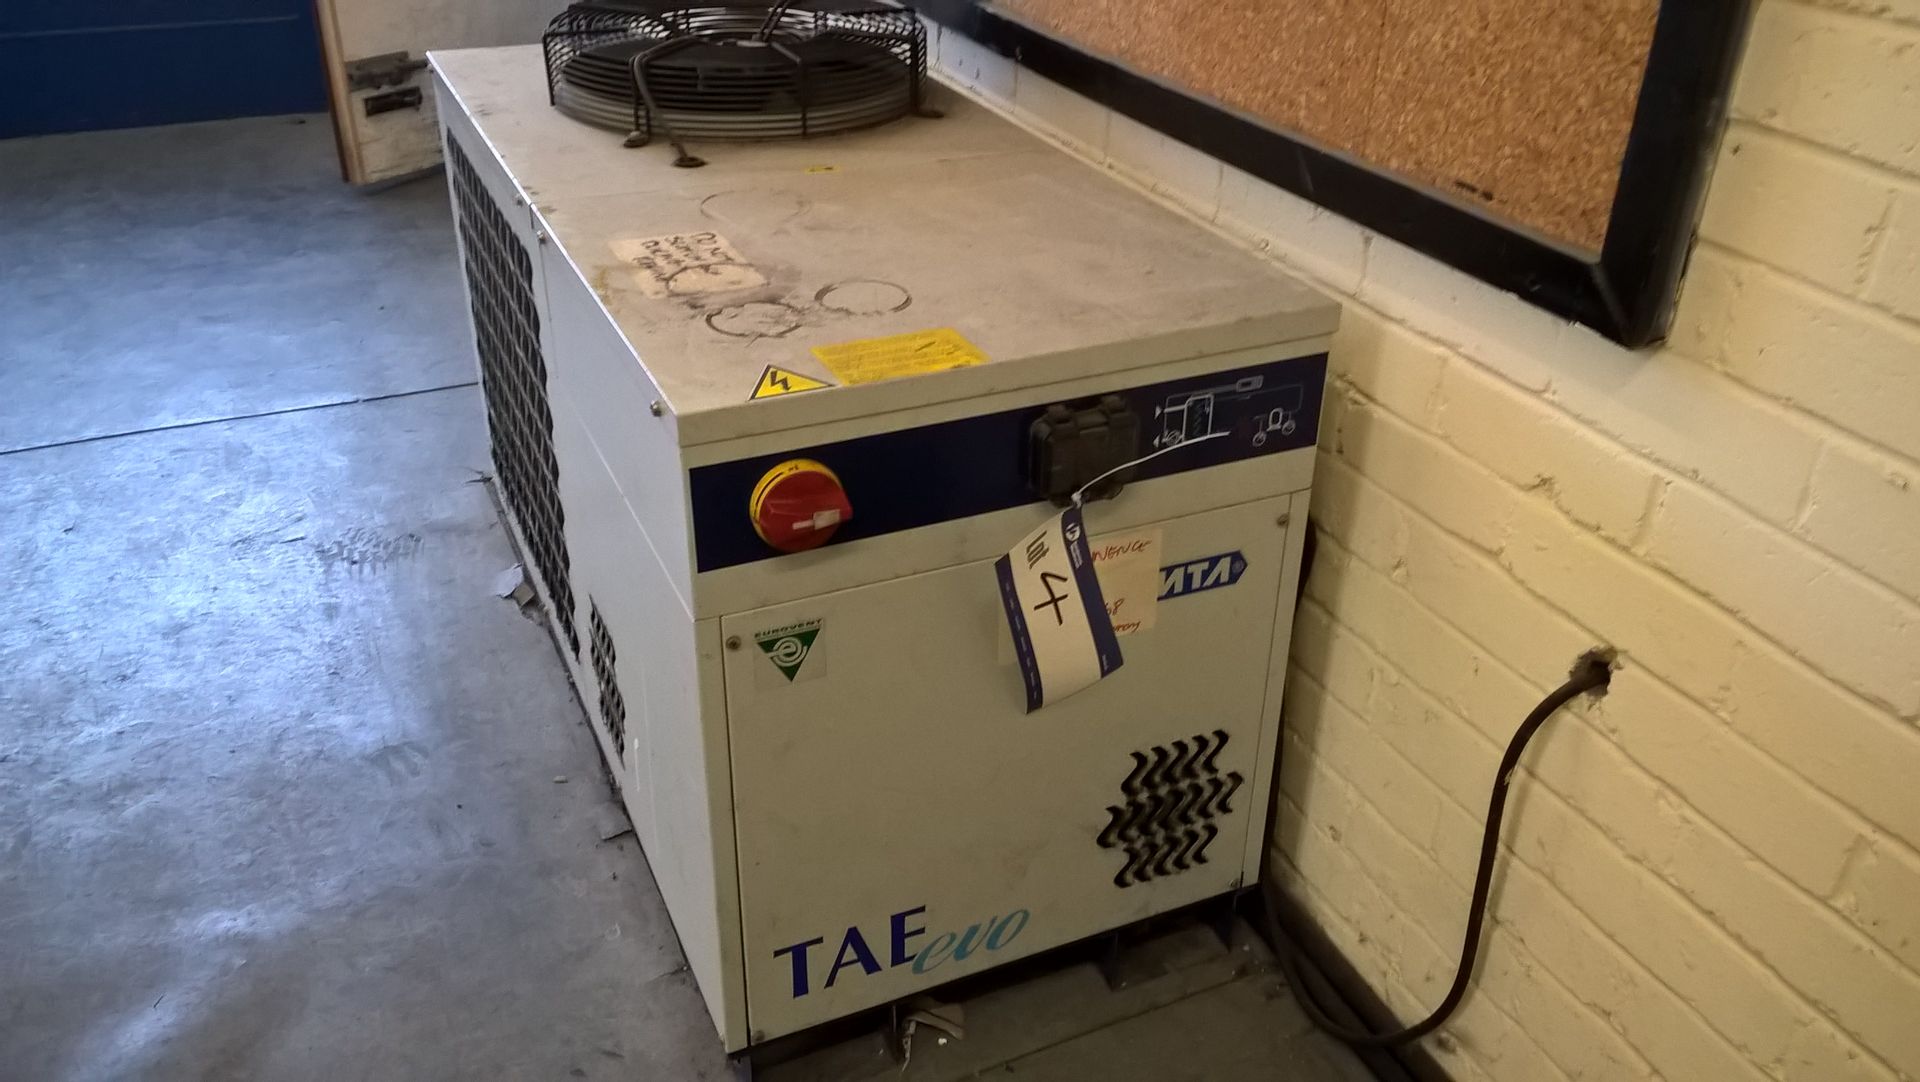 TAE Evo 015 Water Chiller, serial no. 2200182320,